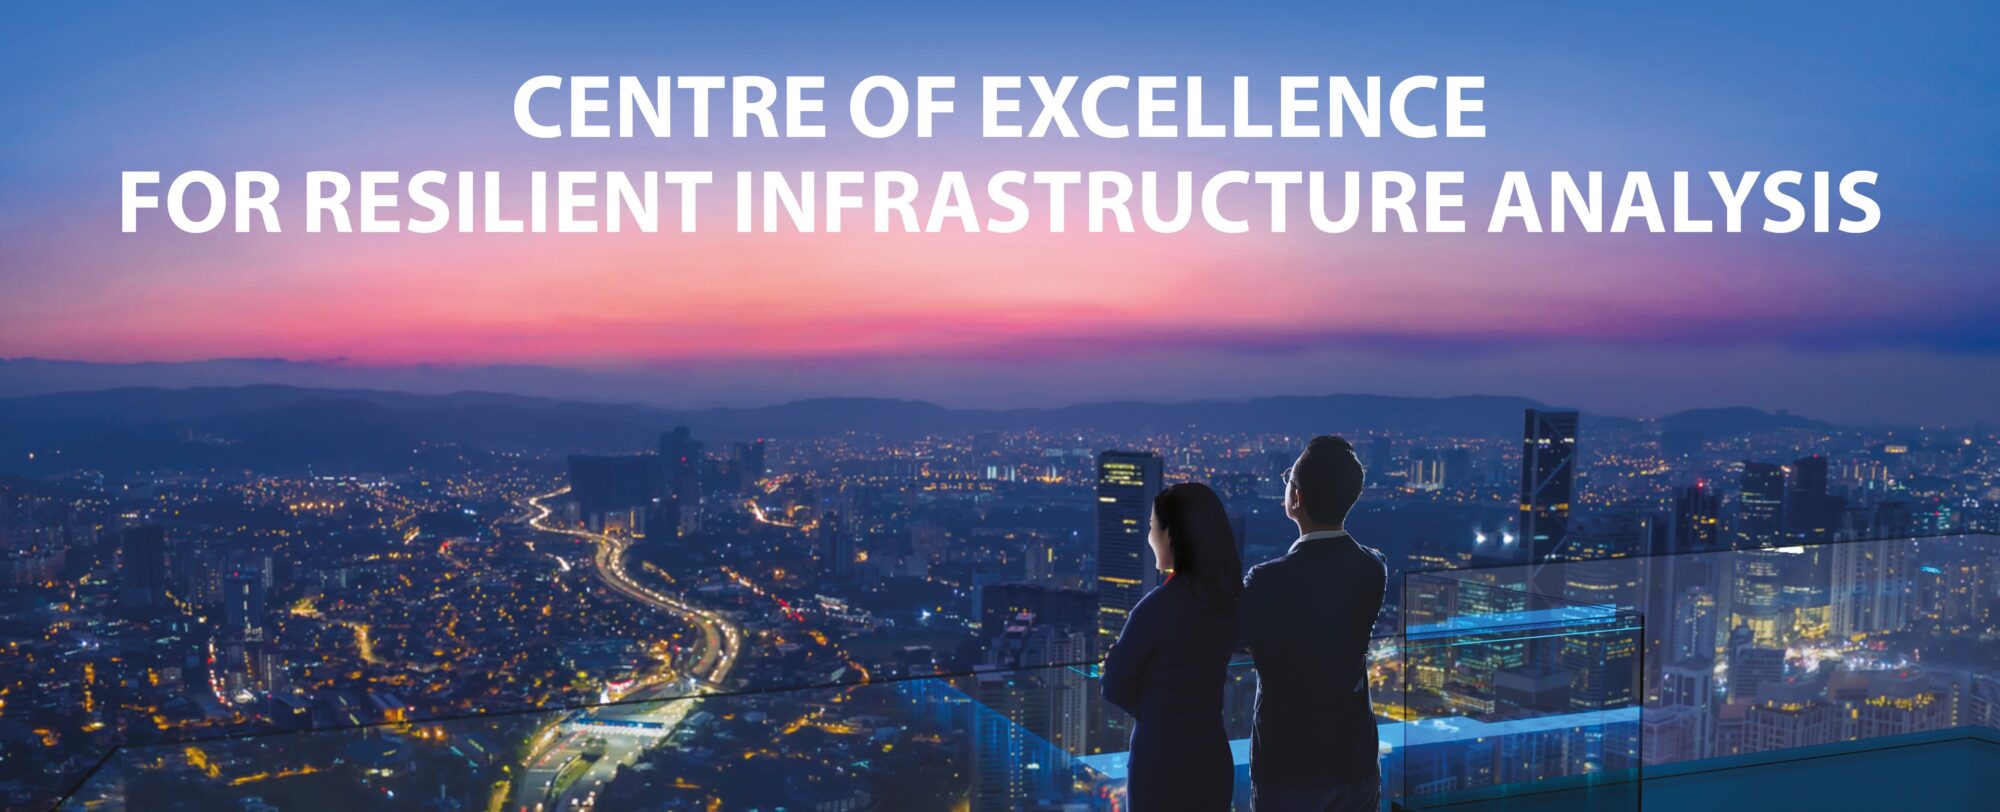 Centre of Excellence for Resilient Infrastructure Analysis